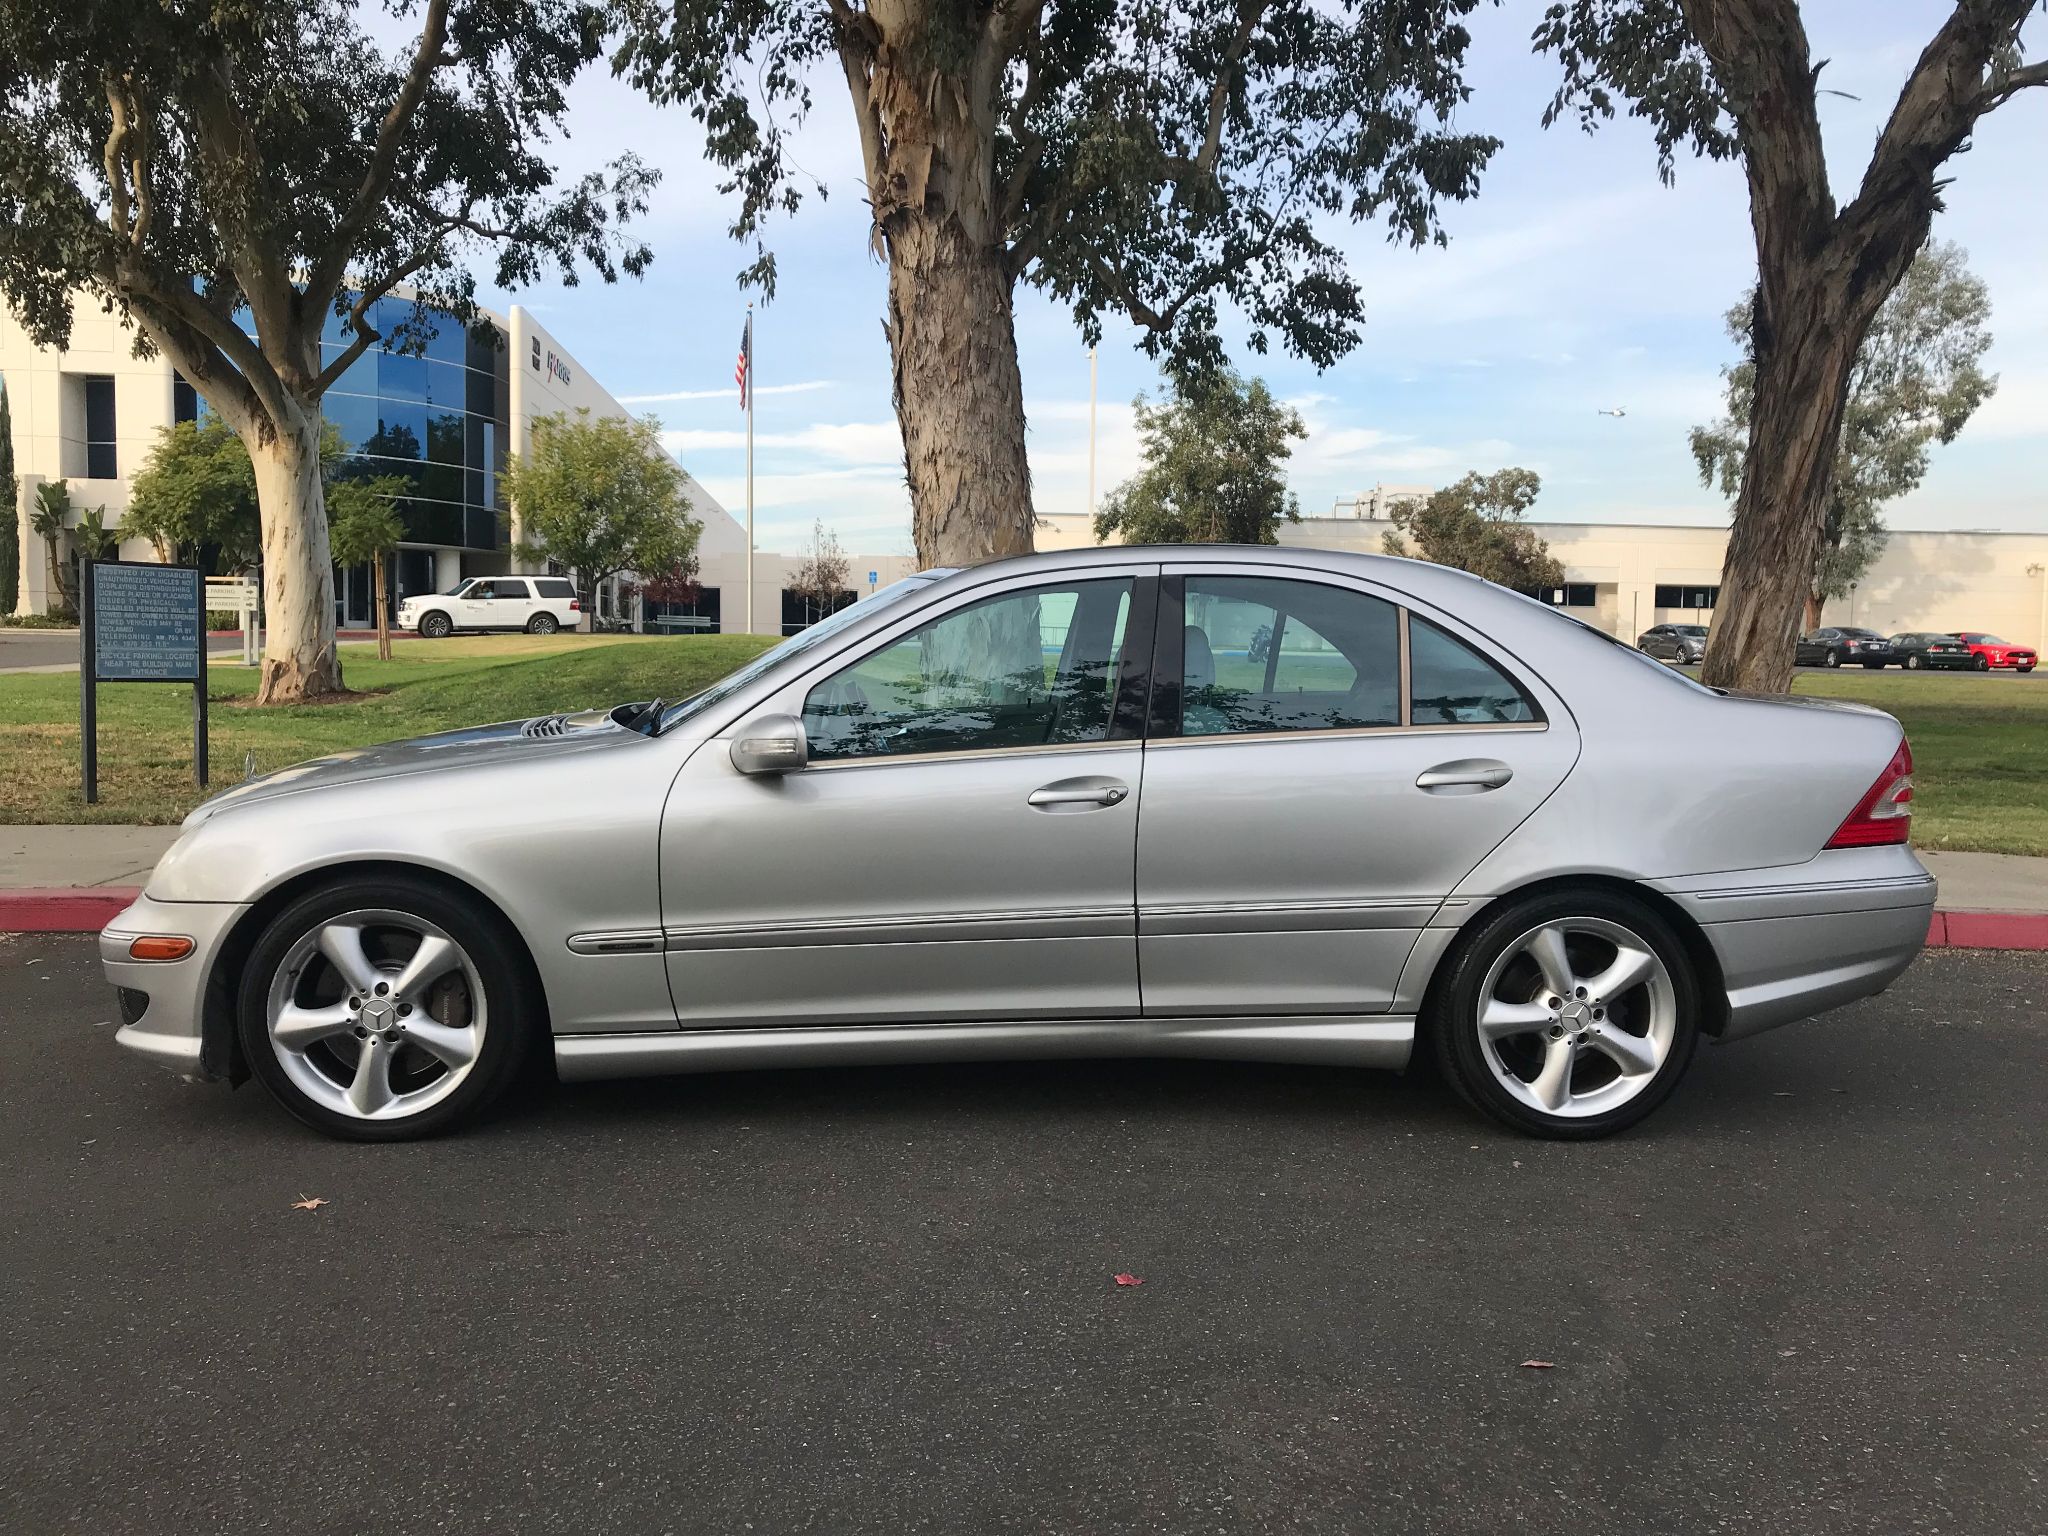 Used 2005 Mercedes-Benz C-Class 1.8L at City Cars Warehouse INC